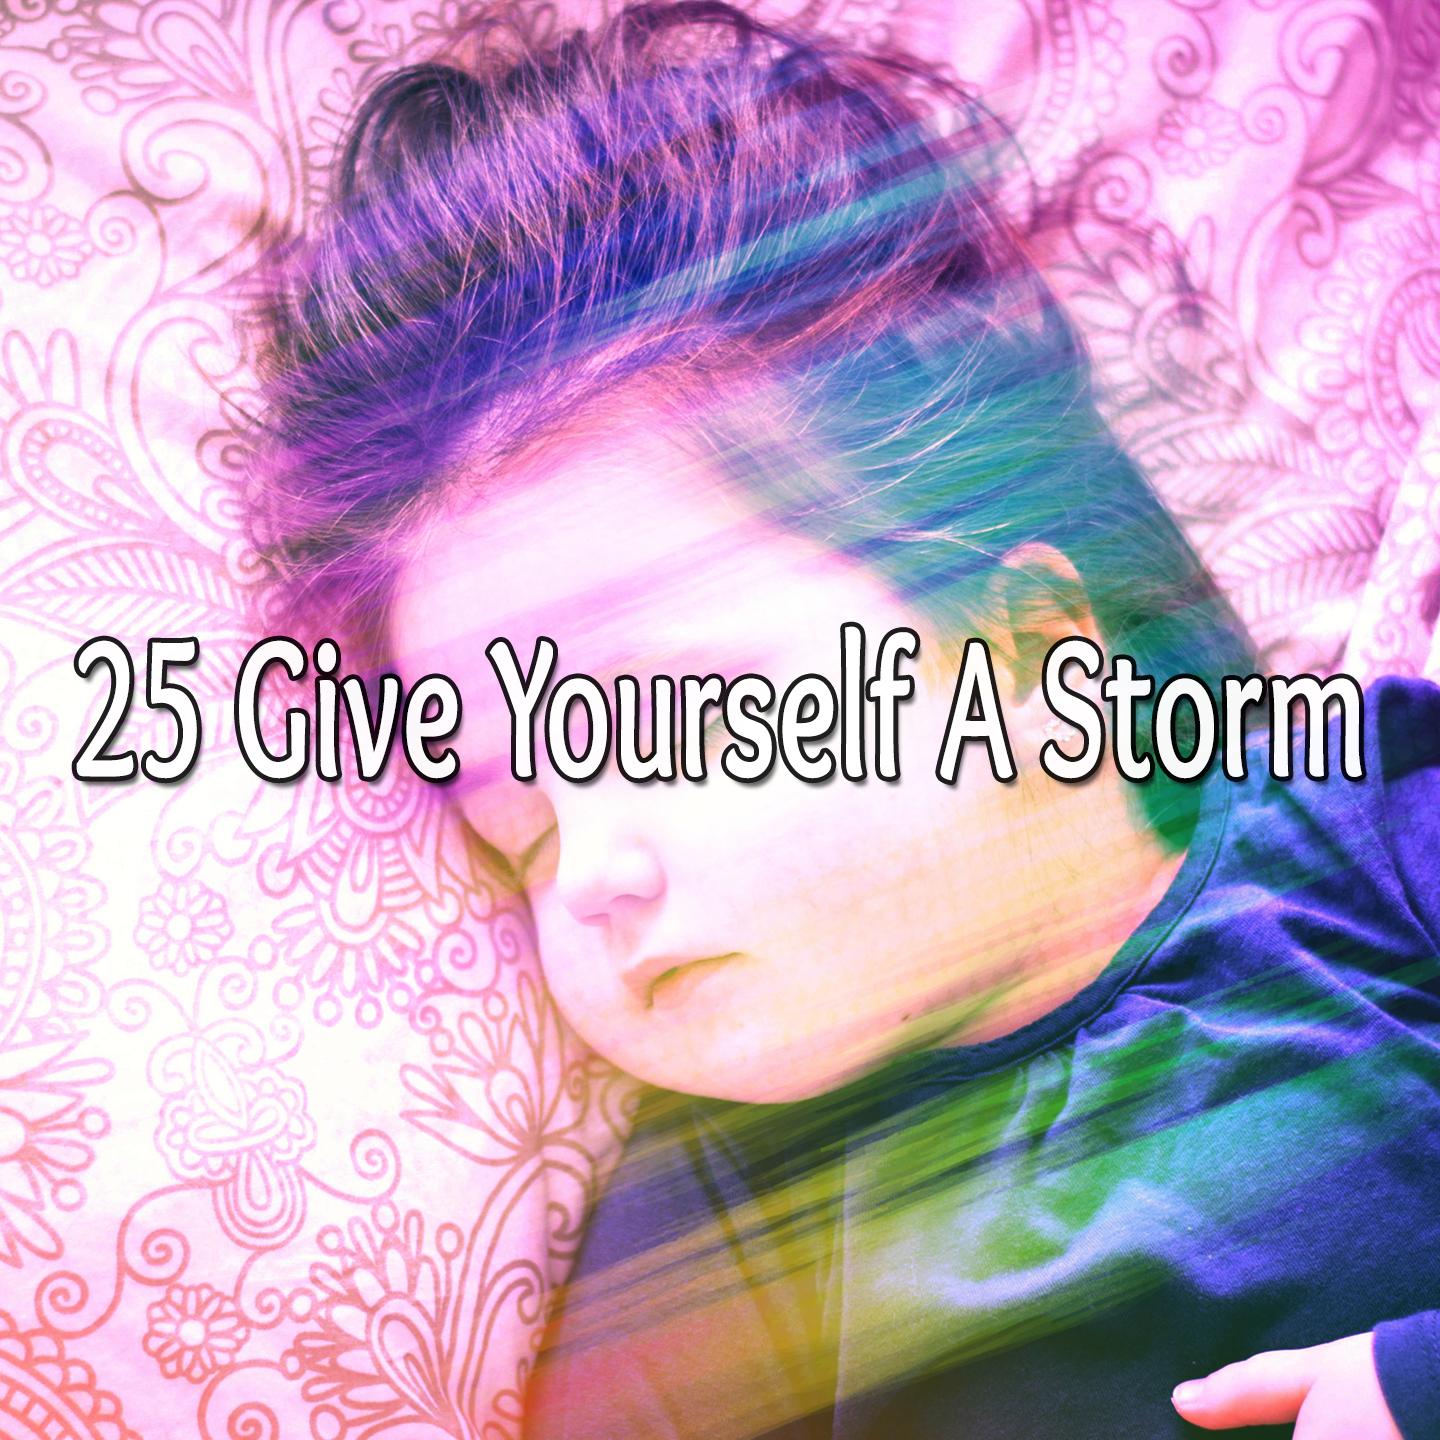 25 Give Yourself a Storm